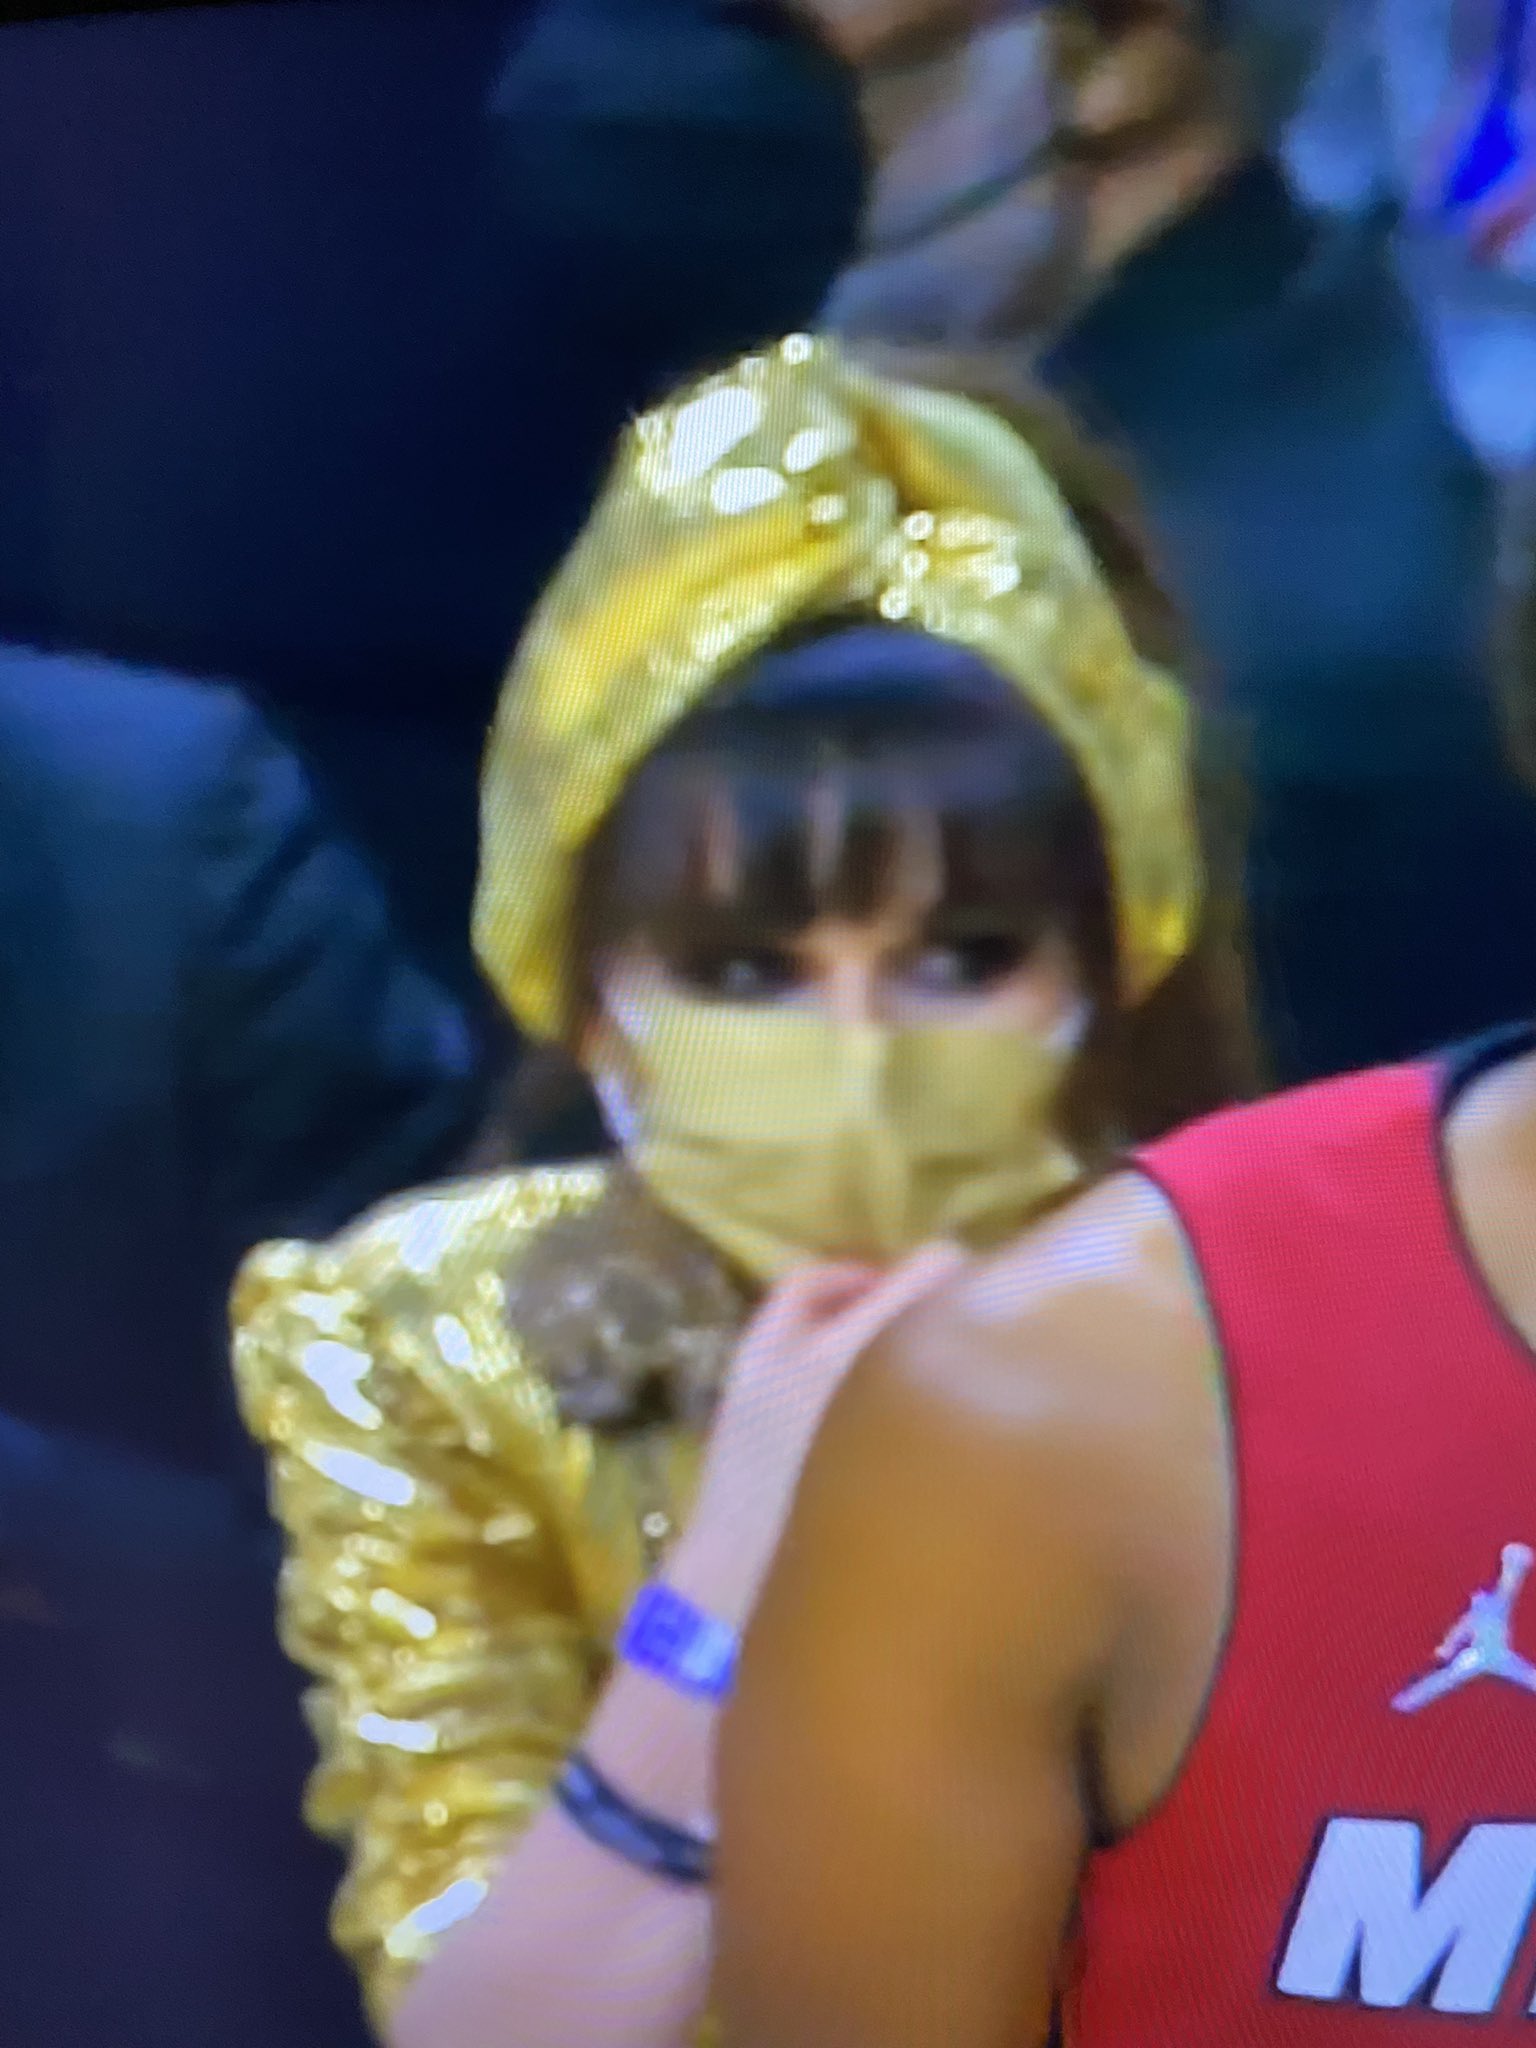 Who is Radmila Lolly? The courtside Miami Heat dress lady at NBA Finals